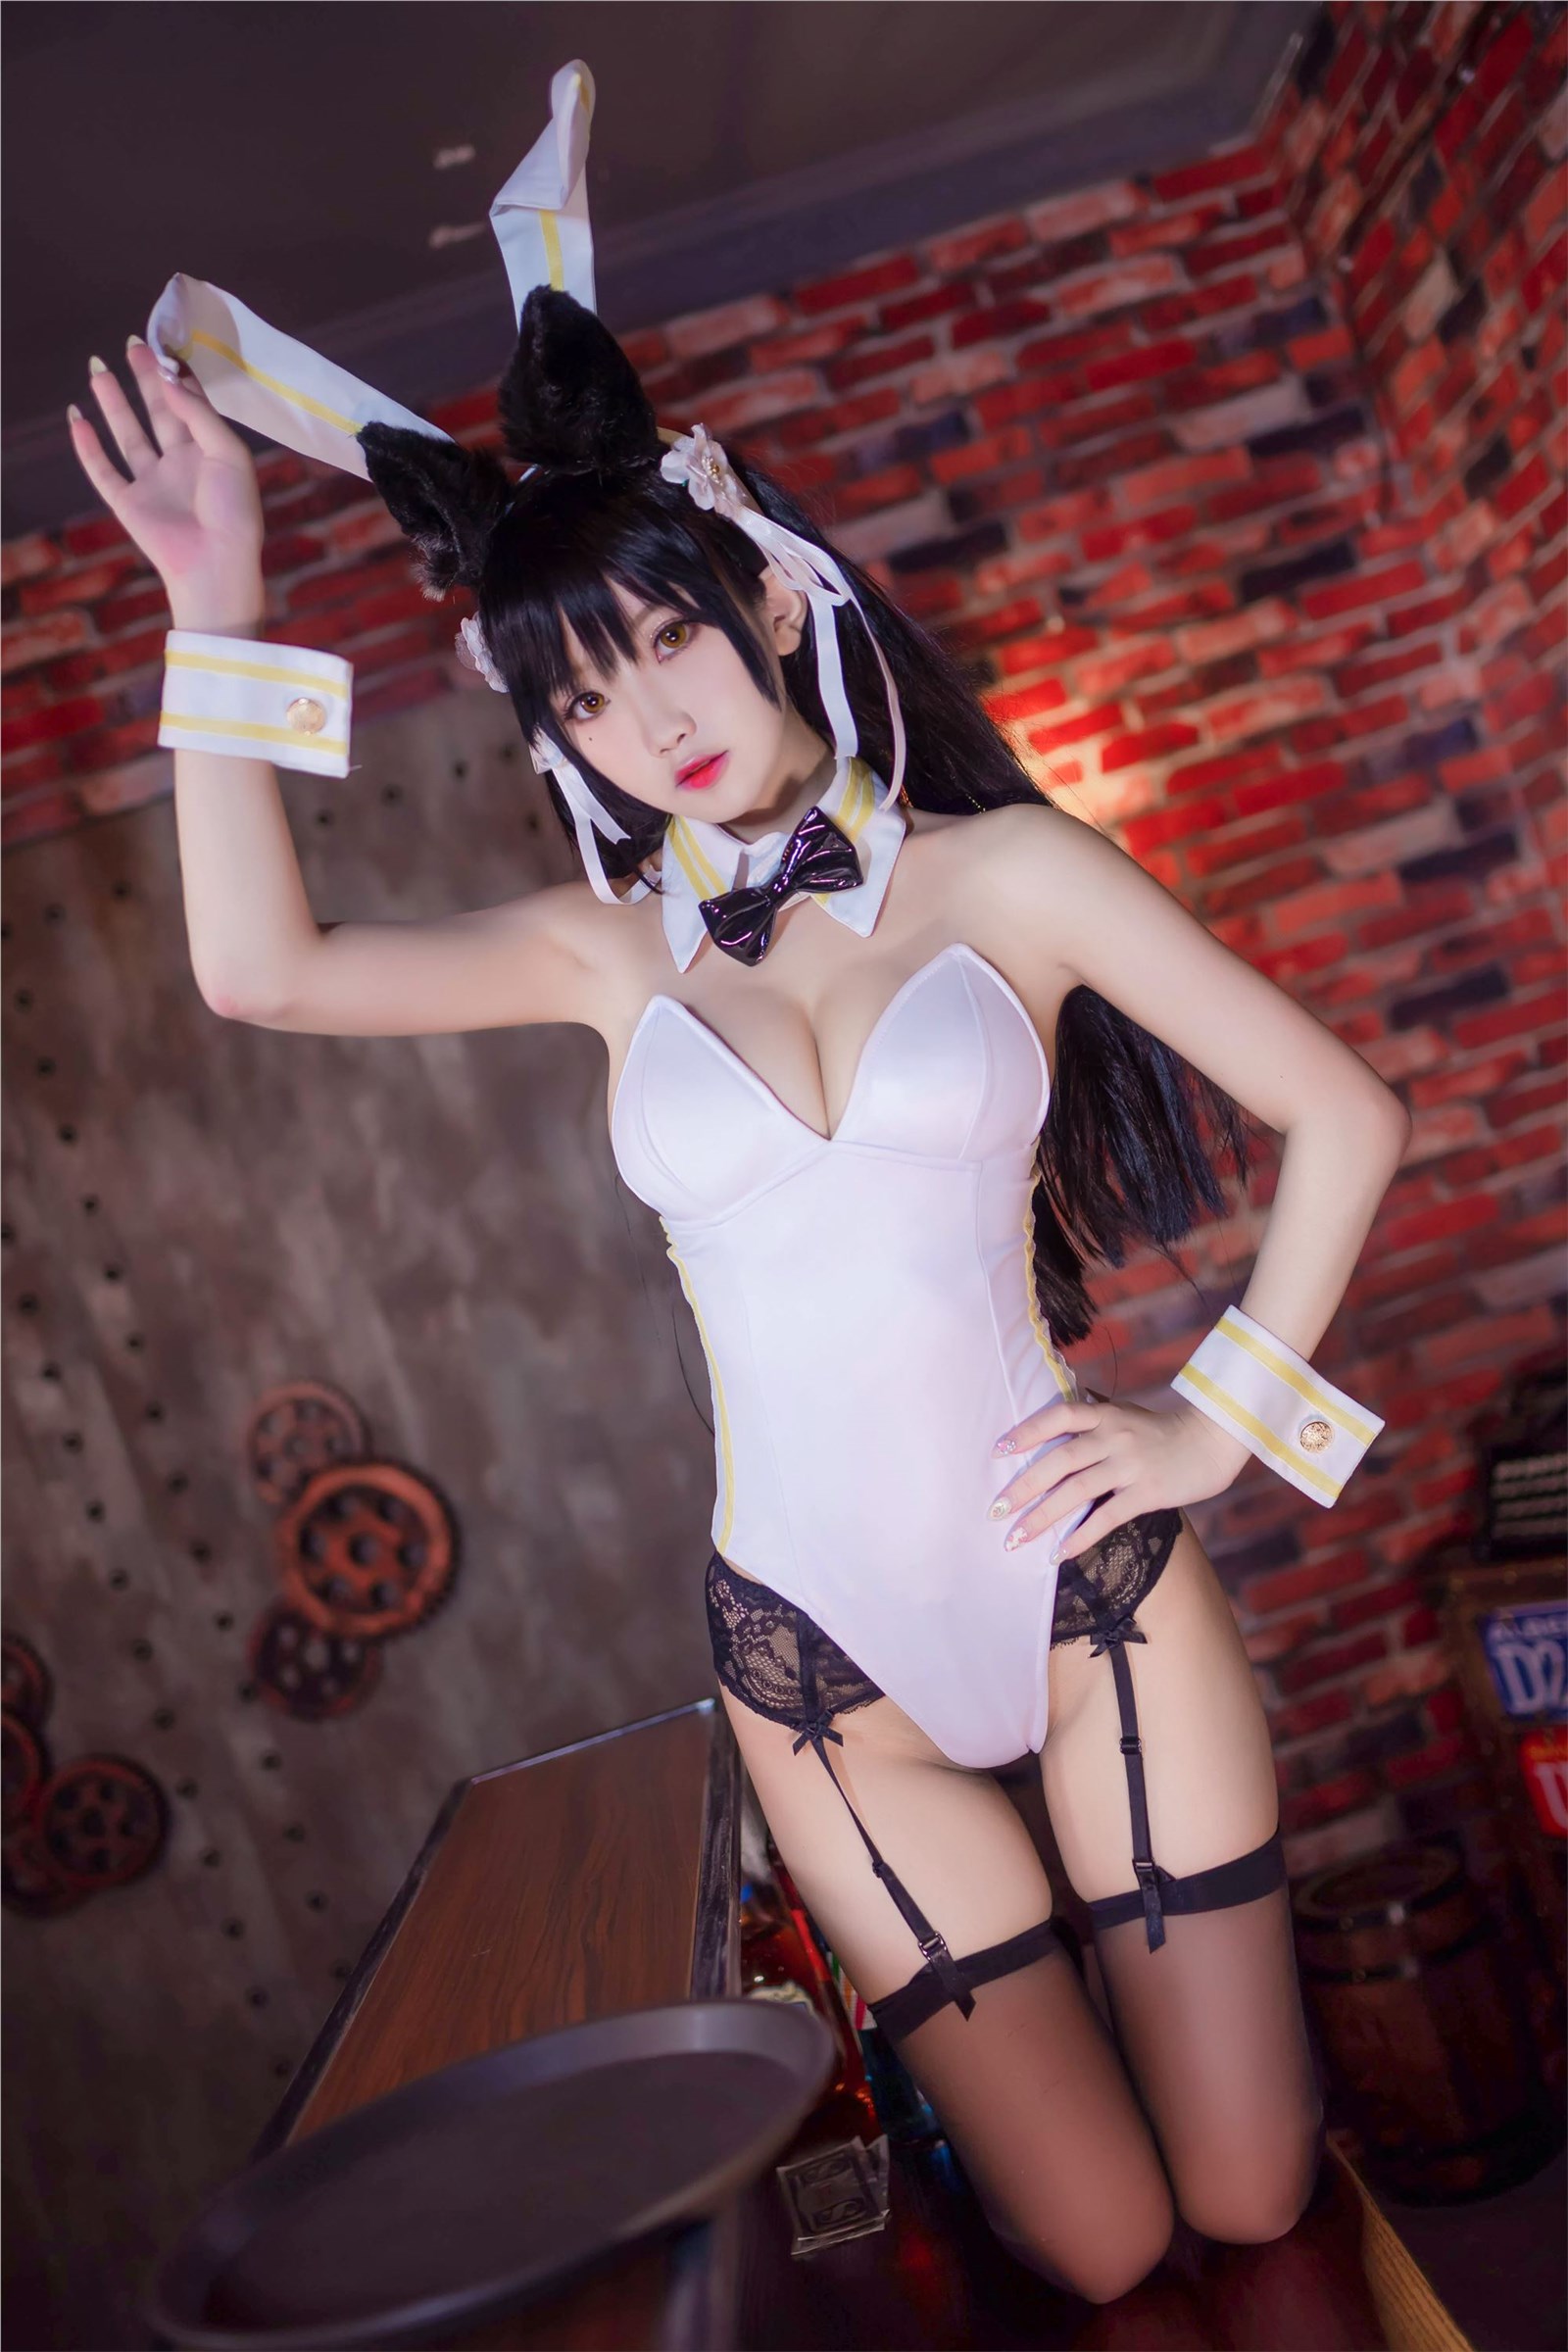 Cosplay is Yao in or not - bar Bunny(12)